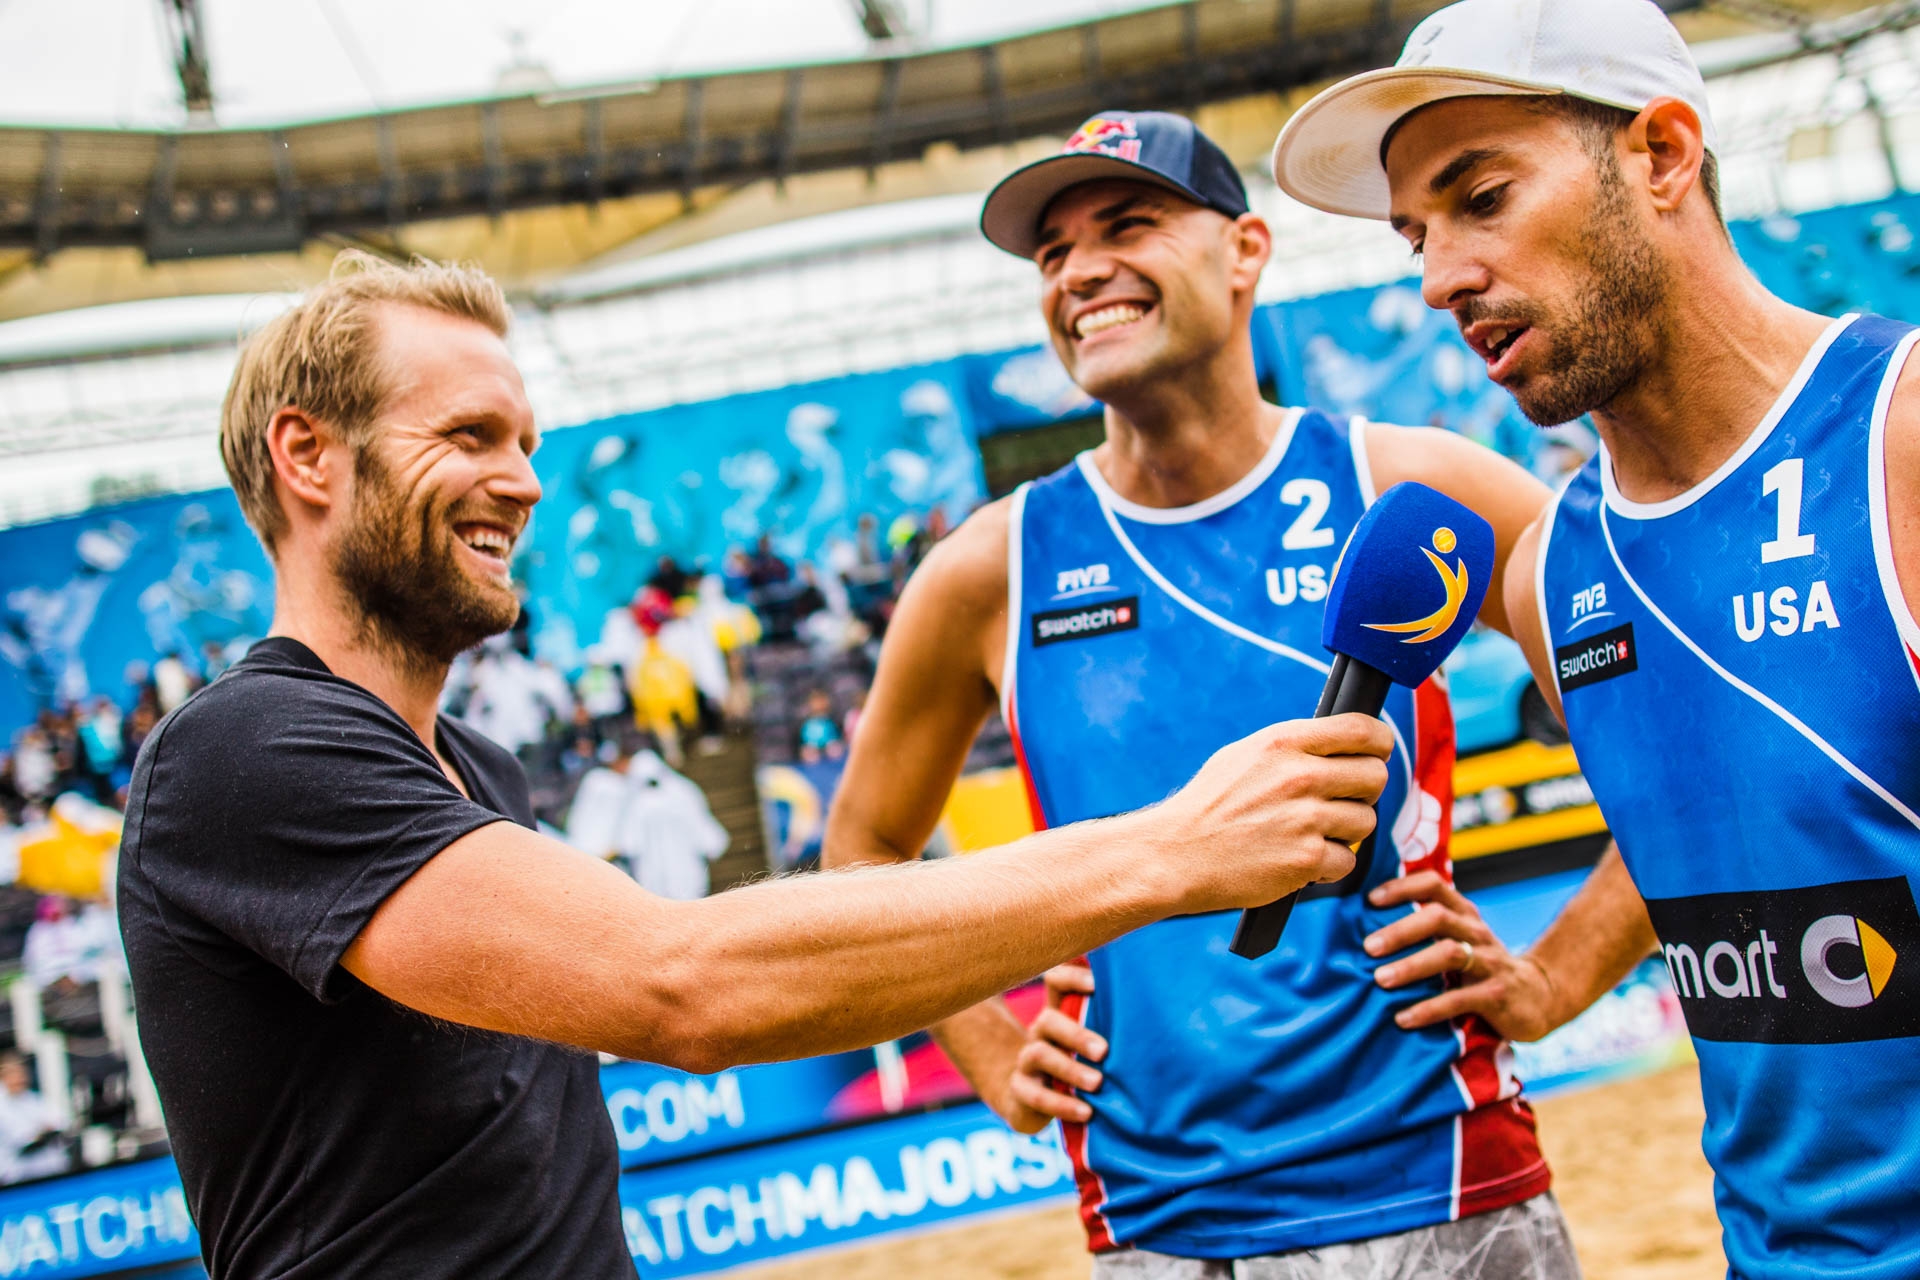 Thumbs up if you’re in the final! Photocredit: Stefan Moertl